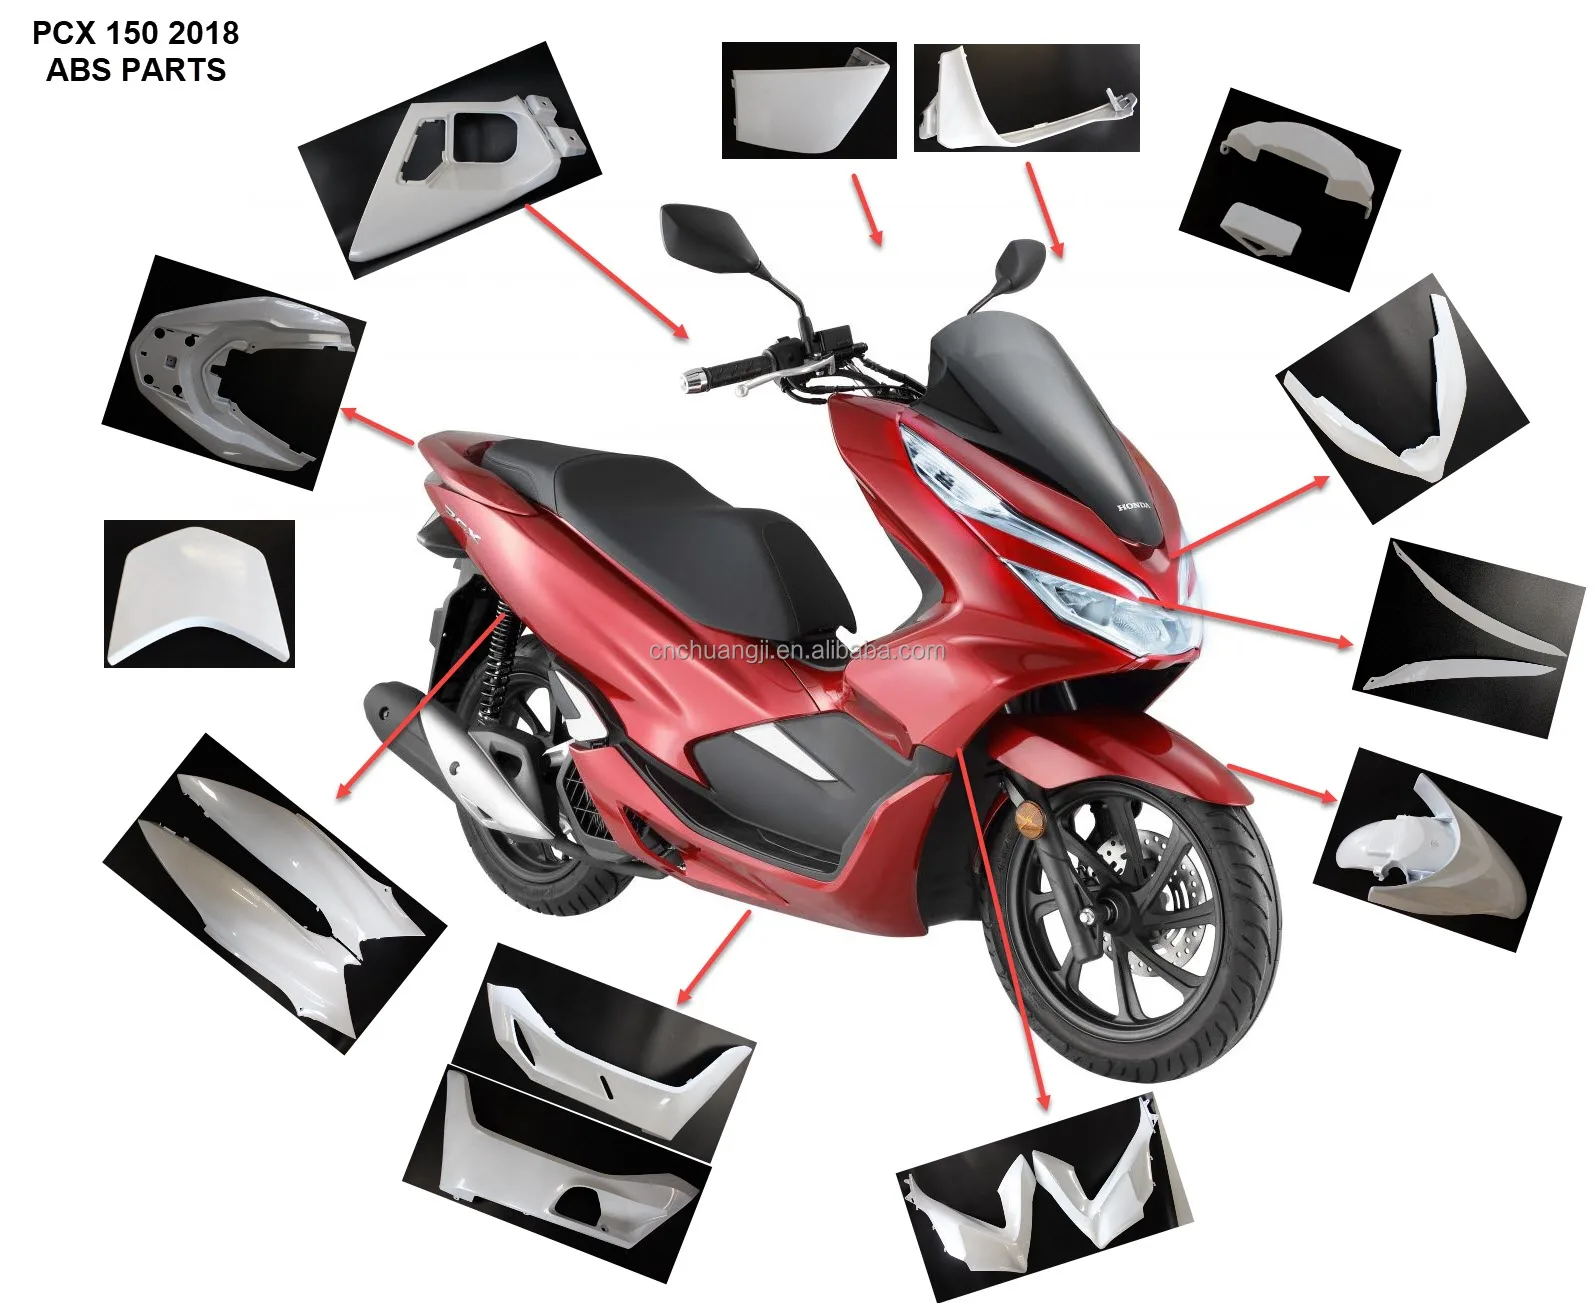 Honda Fairings Set Abs Pcx150 2018 2021 For Honda Scooters Accessories Parts White Black - Buy Scooters Parts For Honda Fairing Pcx150 2018,Fairing Set For Pcx 150 2018 Integration Parts,Scooter Accessories